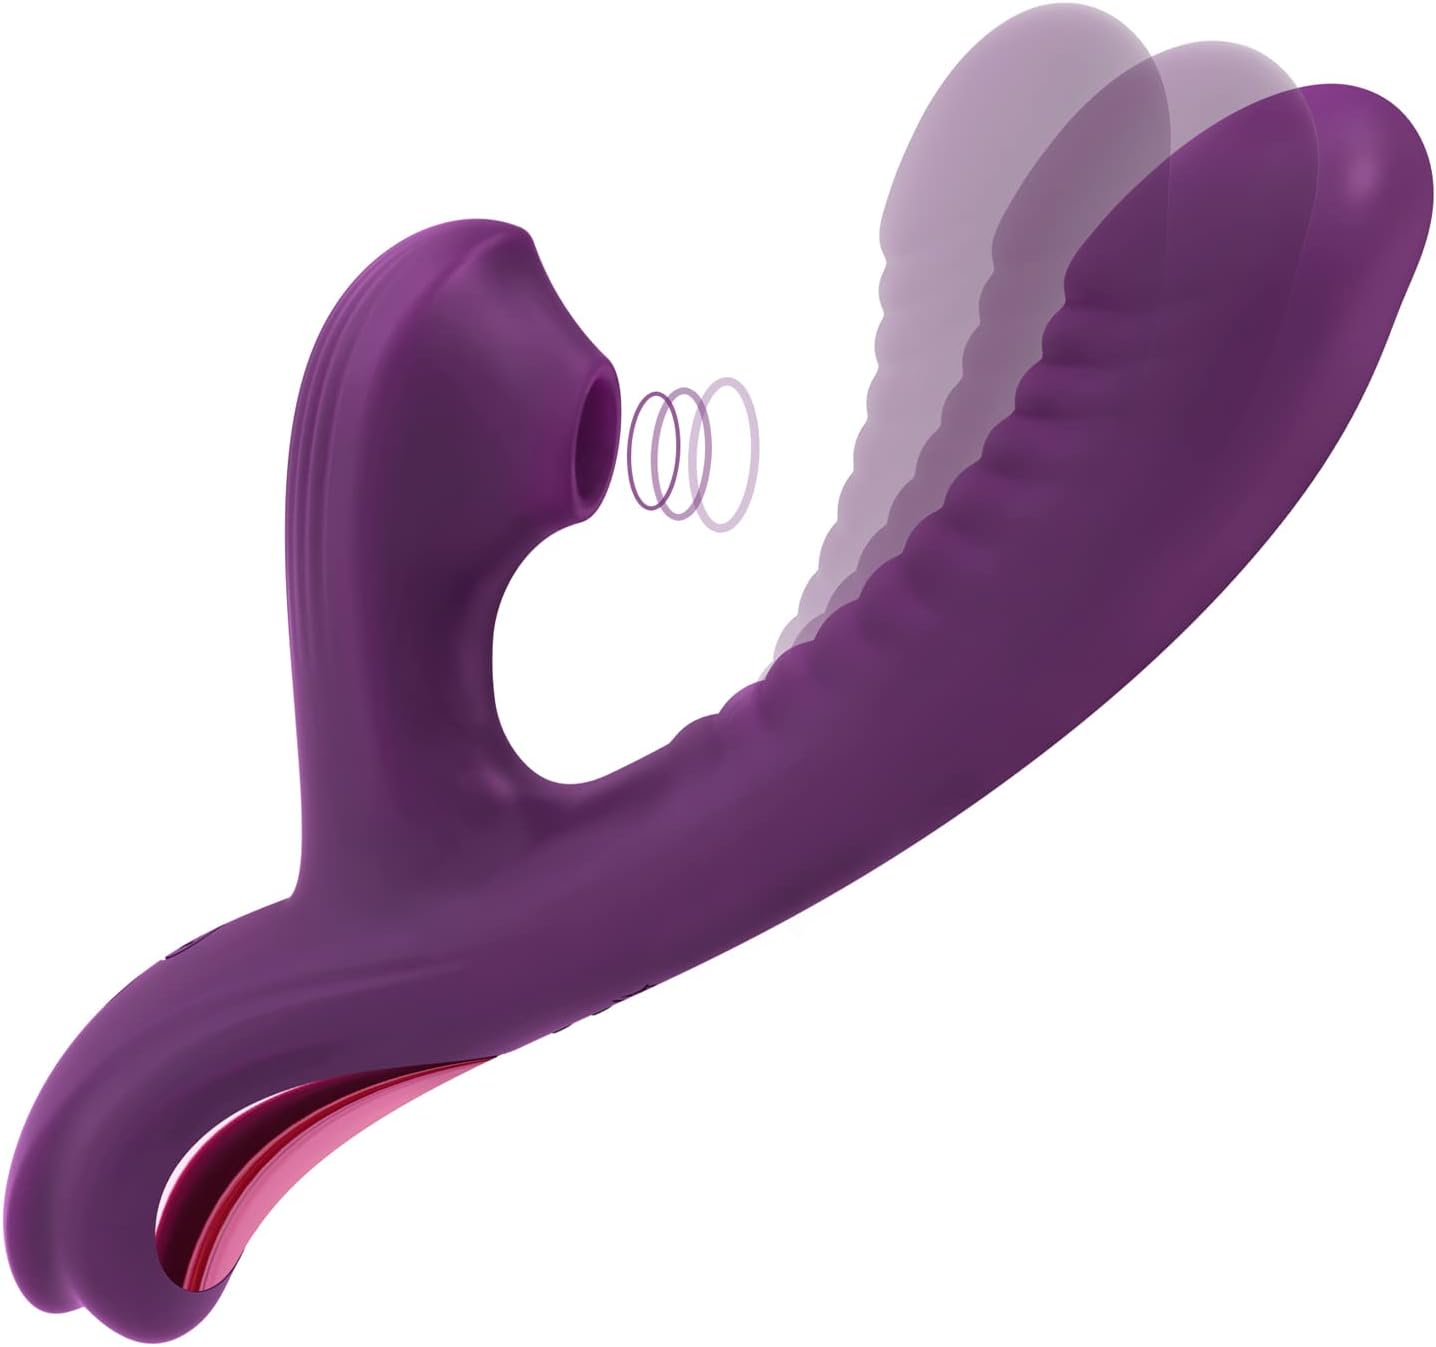 7 Types of Vibrators To Help You Find Your Pleasure in 2023 image